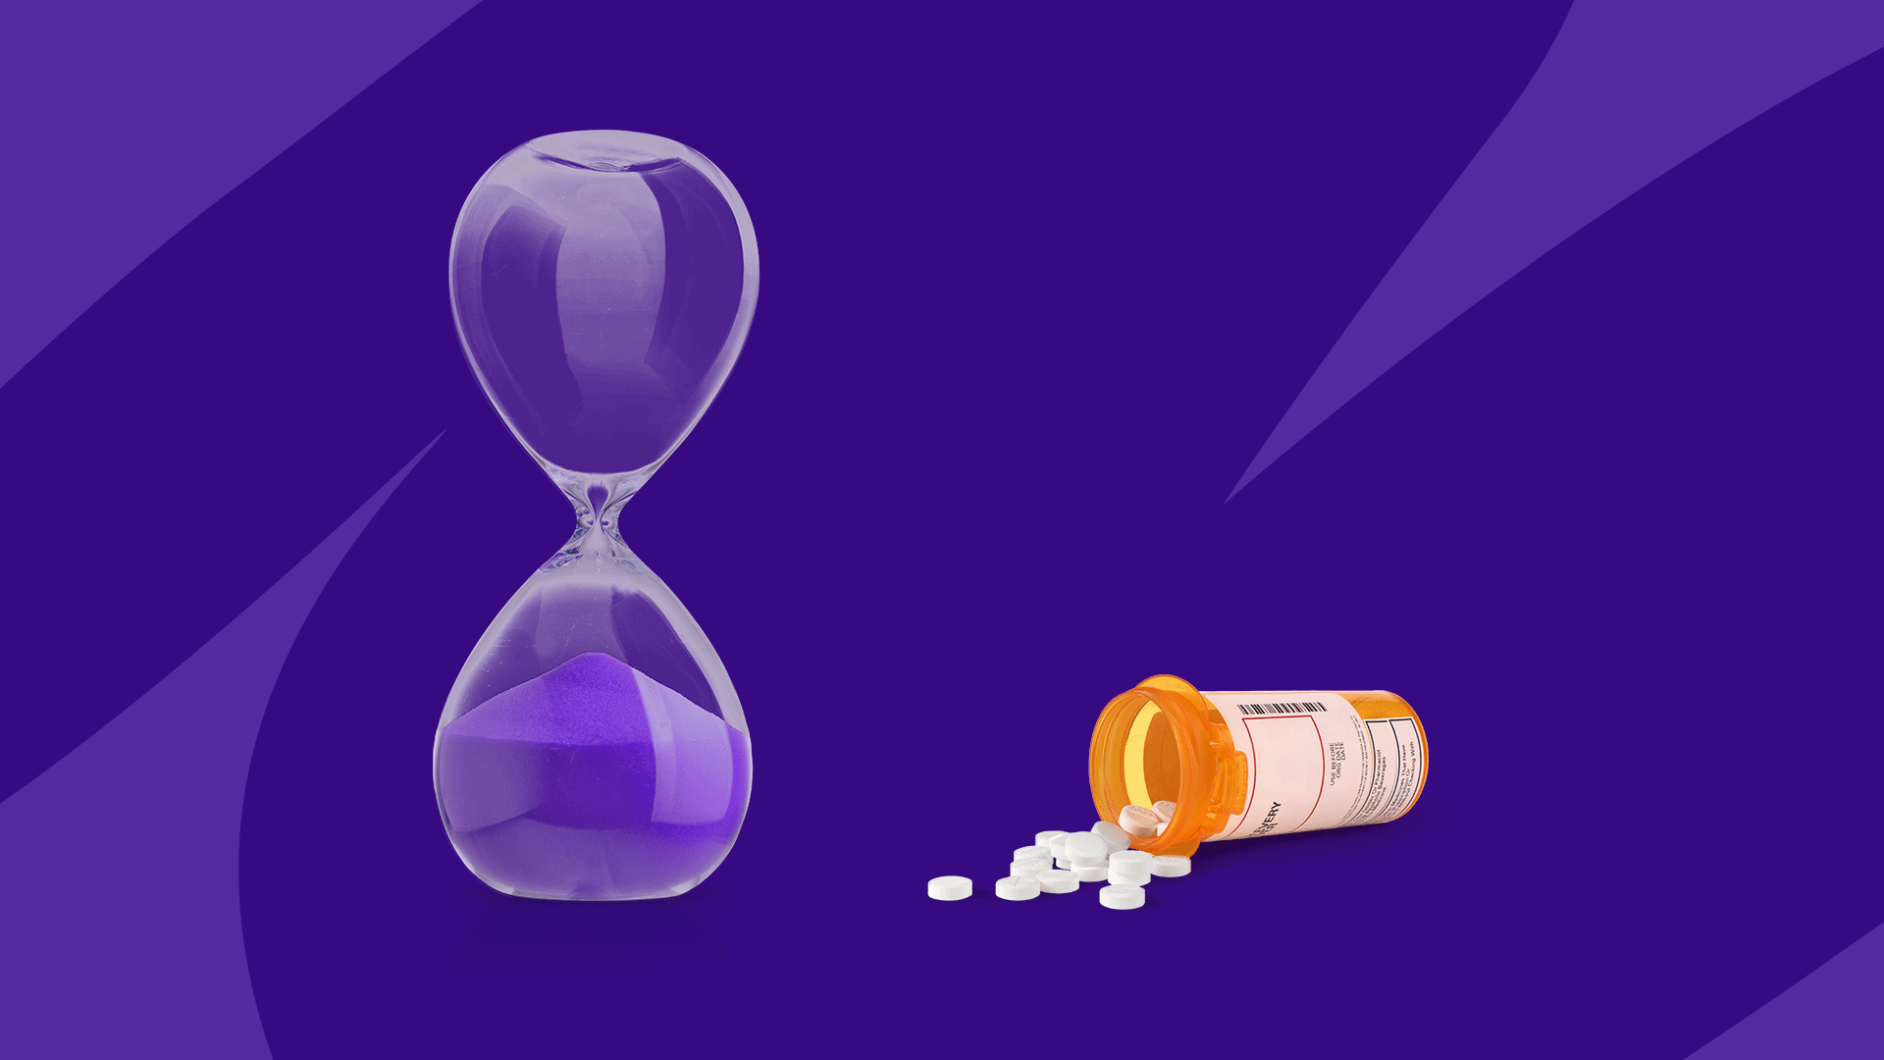 timer and bottle of pills - expired medicine